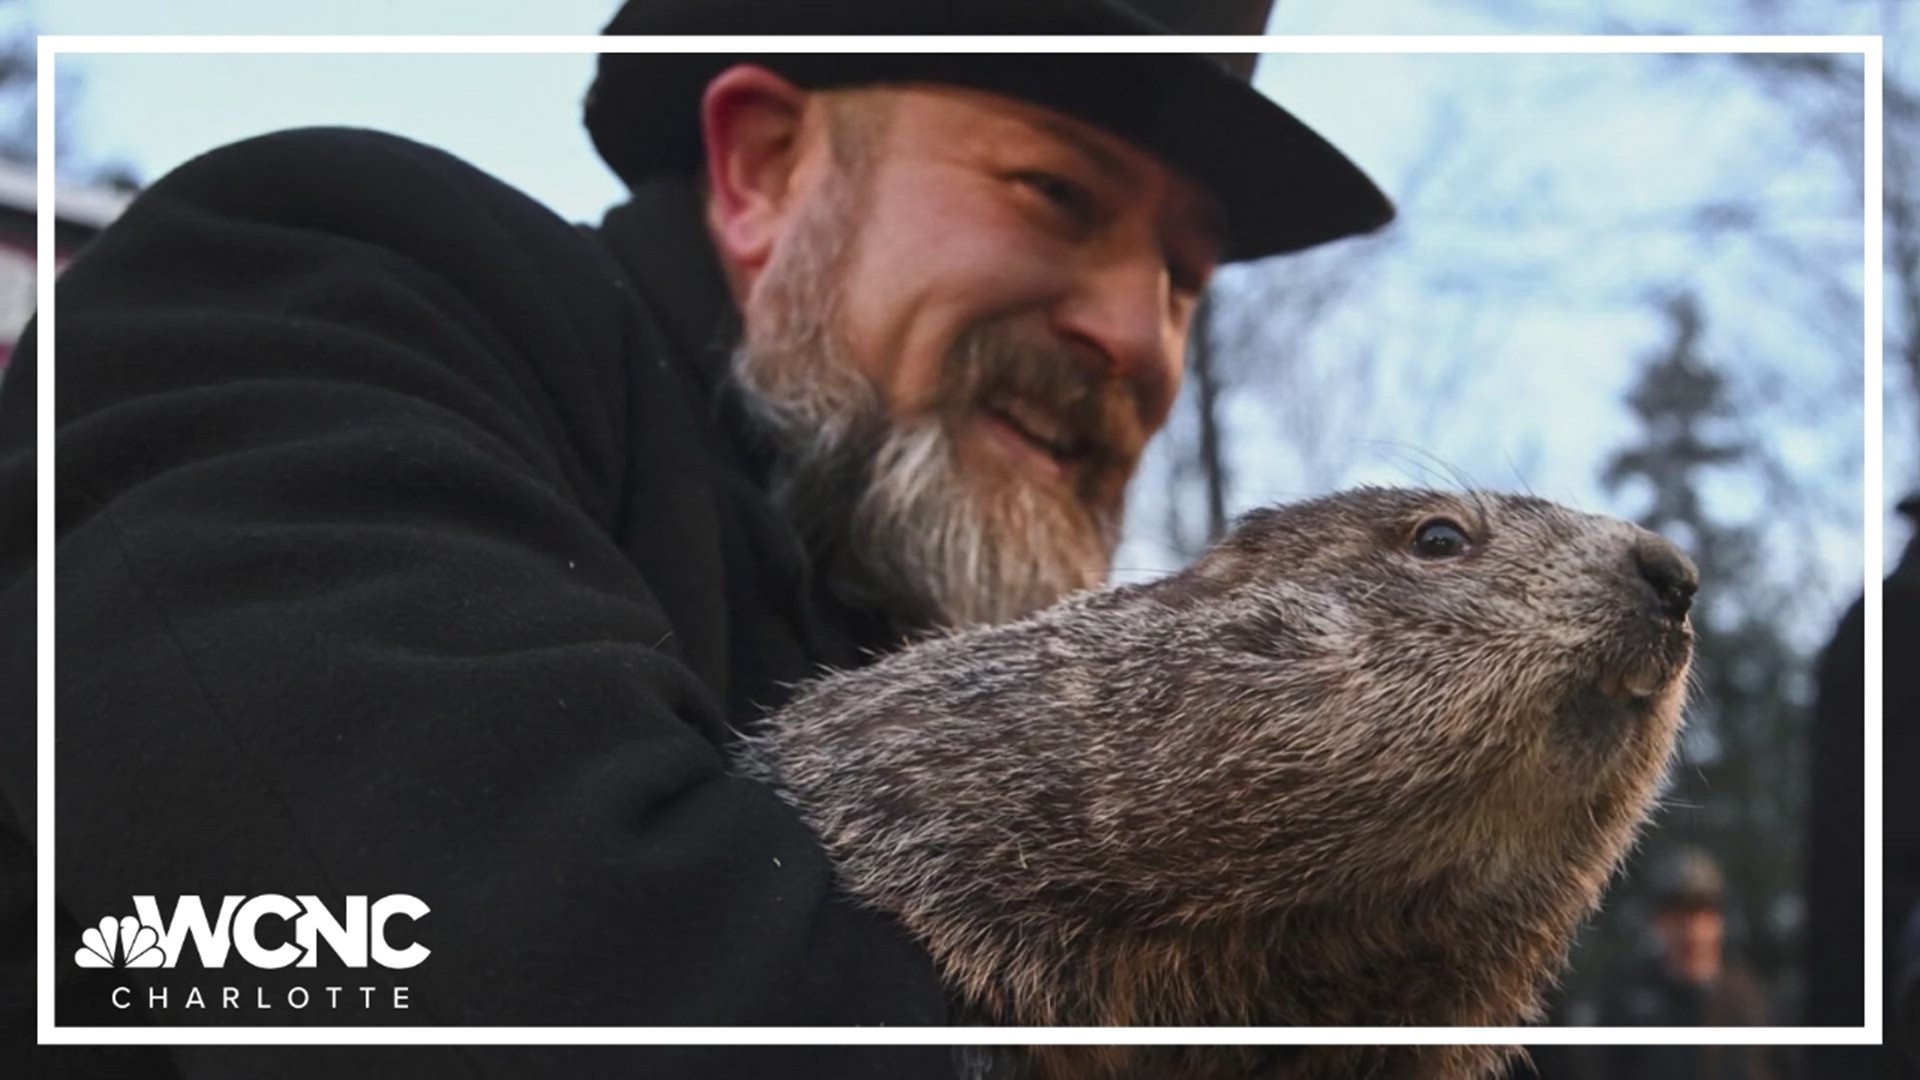 A quick look at Gobbler's Knob where Punxsutawney Phil makes his yearly prediction. WCNC Charlotte's Chris Mulcahy takes a look at the unique tradition.